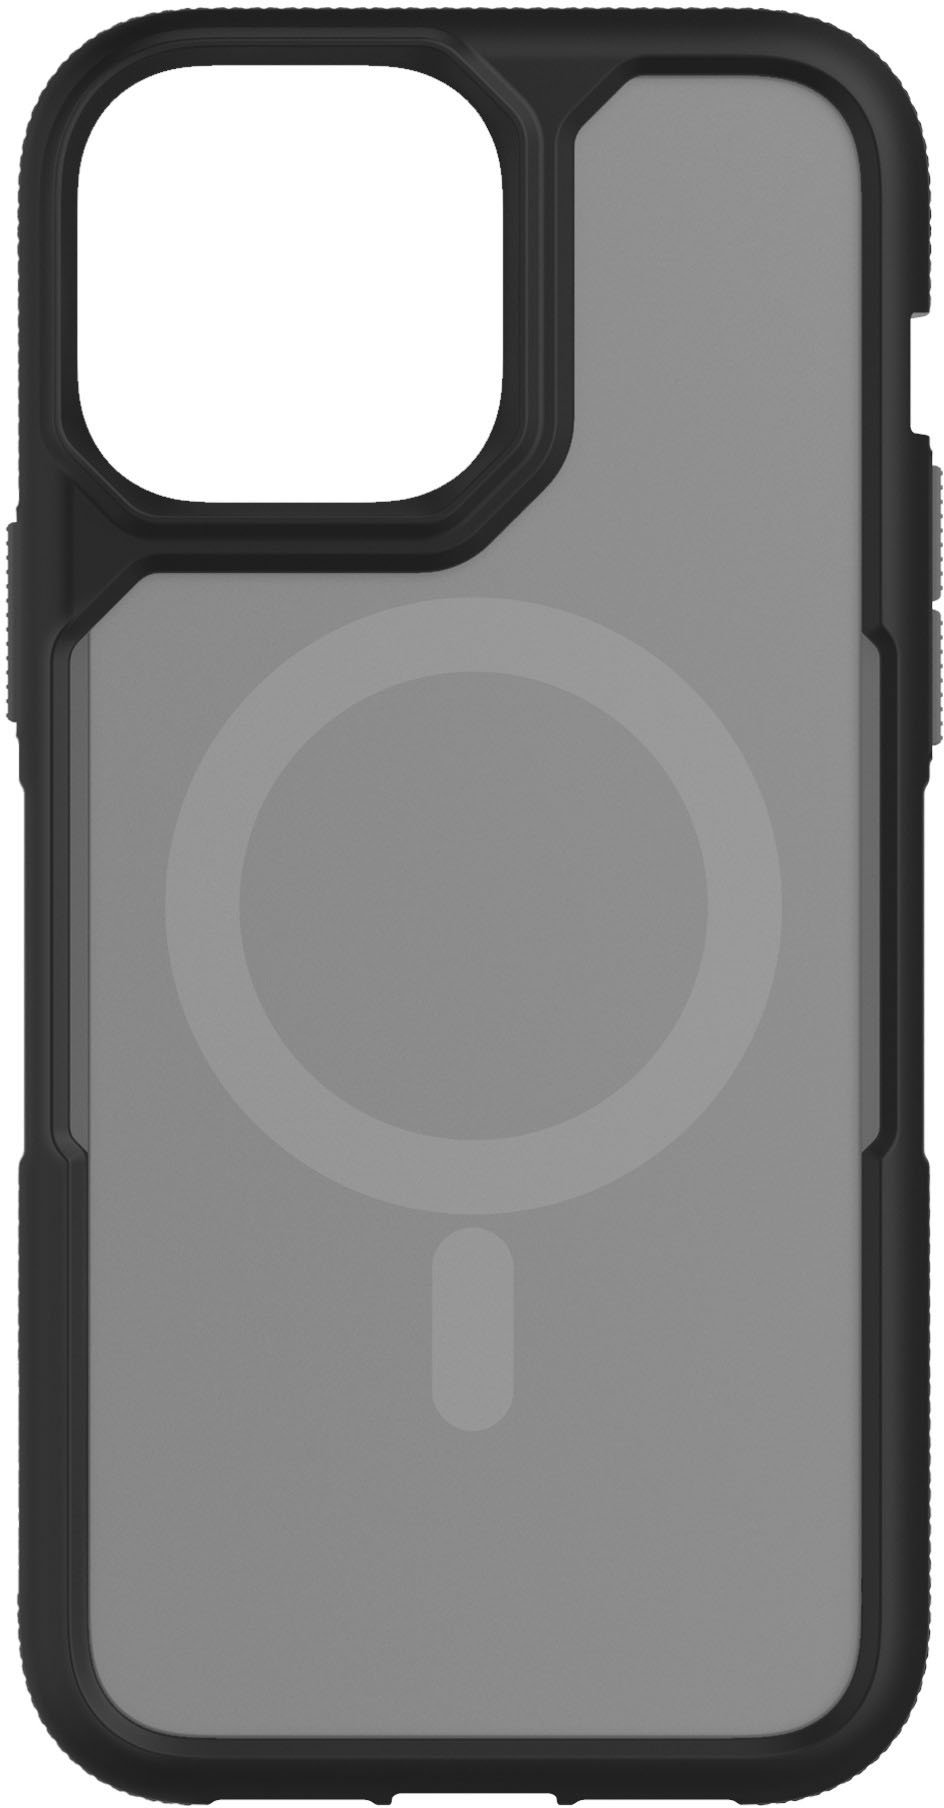 Will Cases Made For the iPhone 13 Pro Fit the iPhone 12 Pro? – BlackBrook  Case